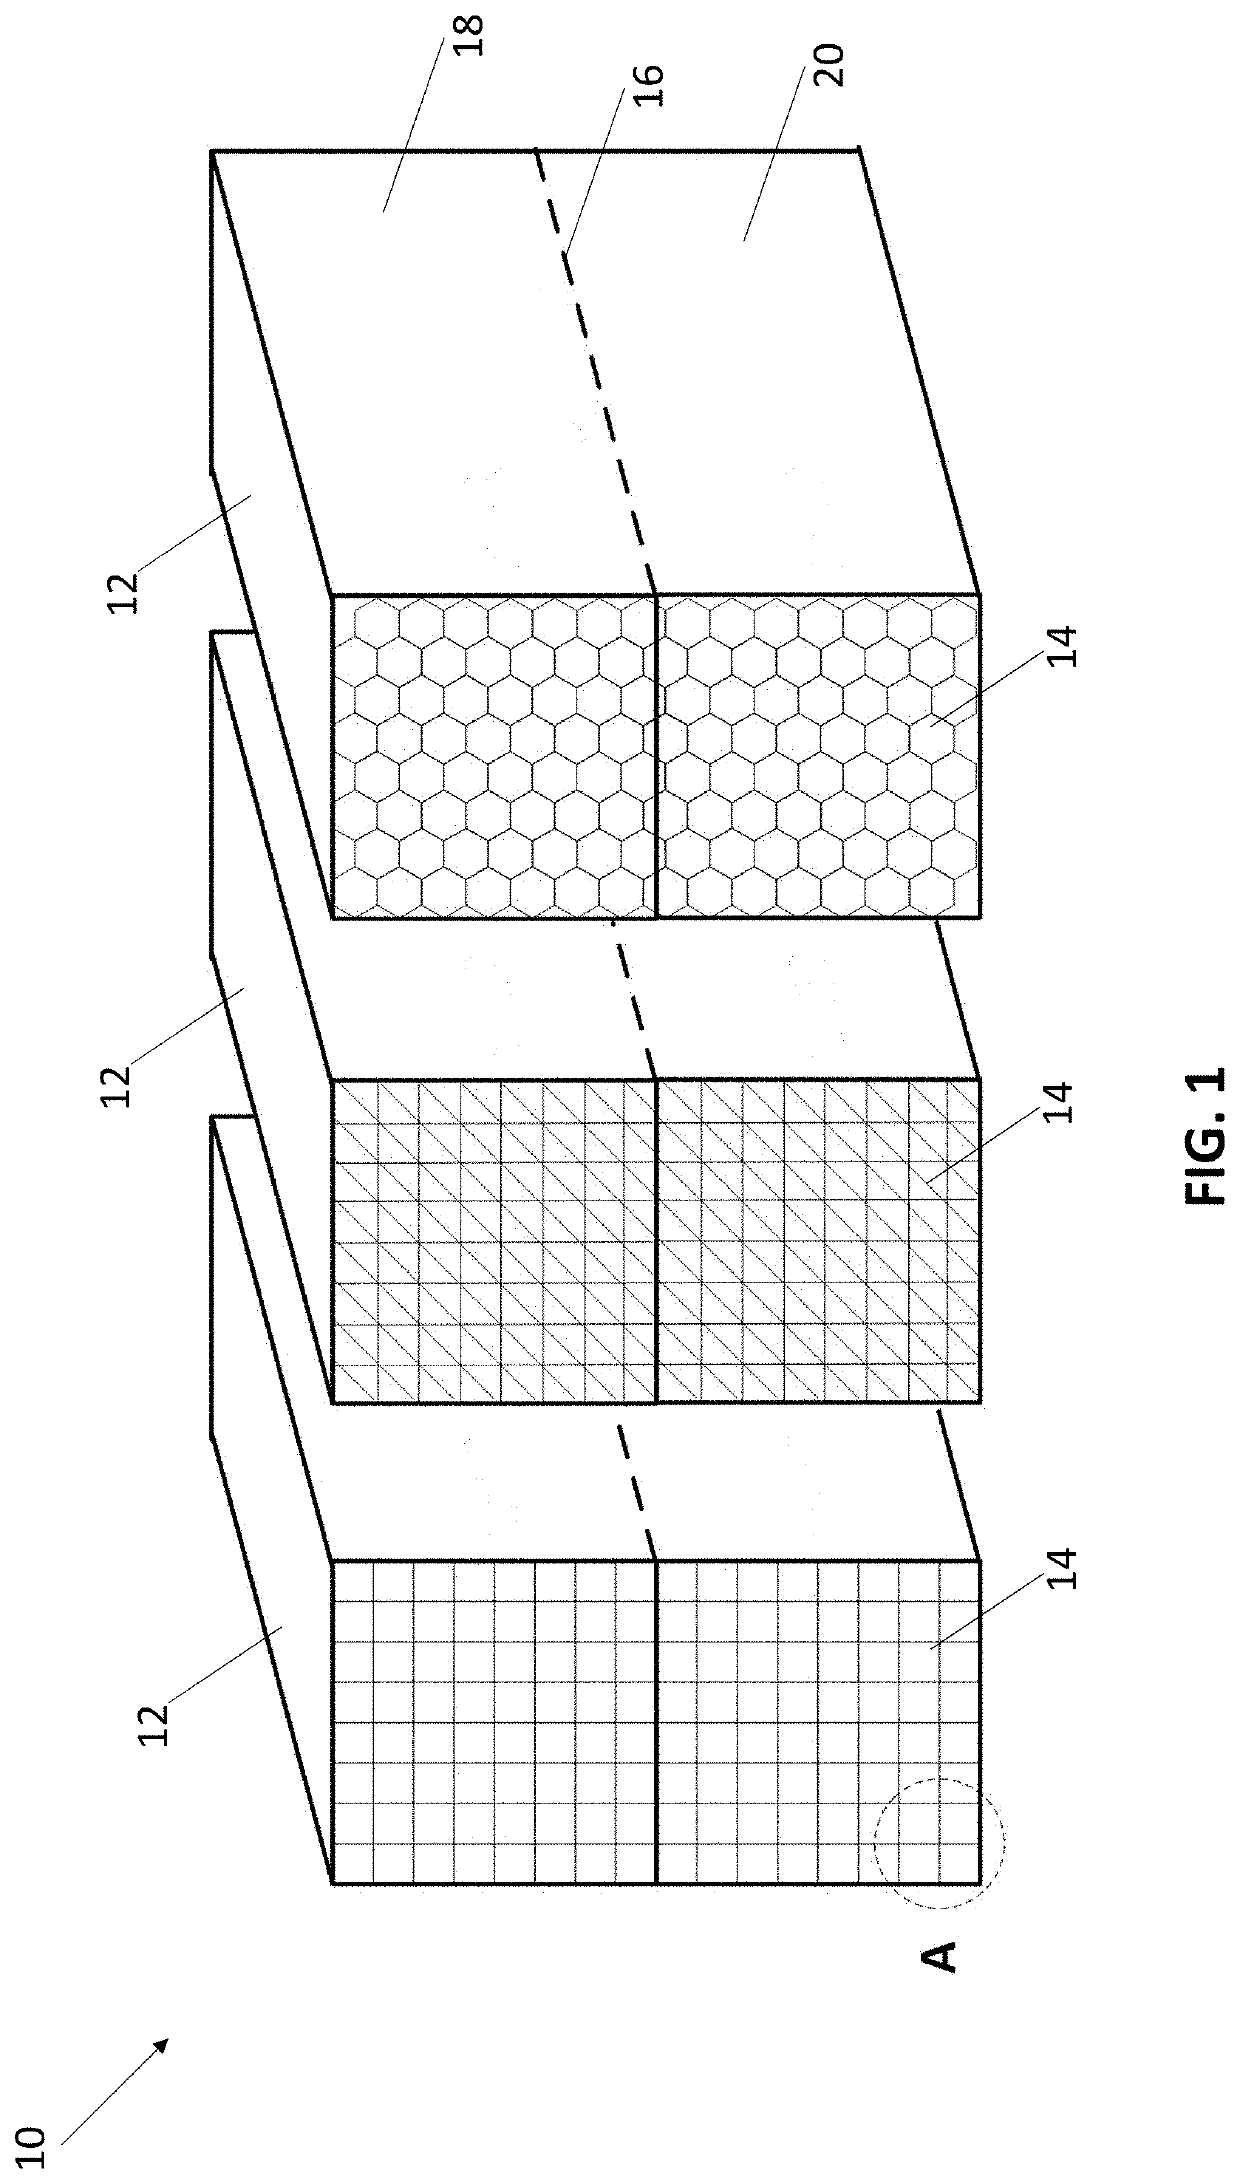 Filtration structure for carbon dioxide scrubber